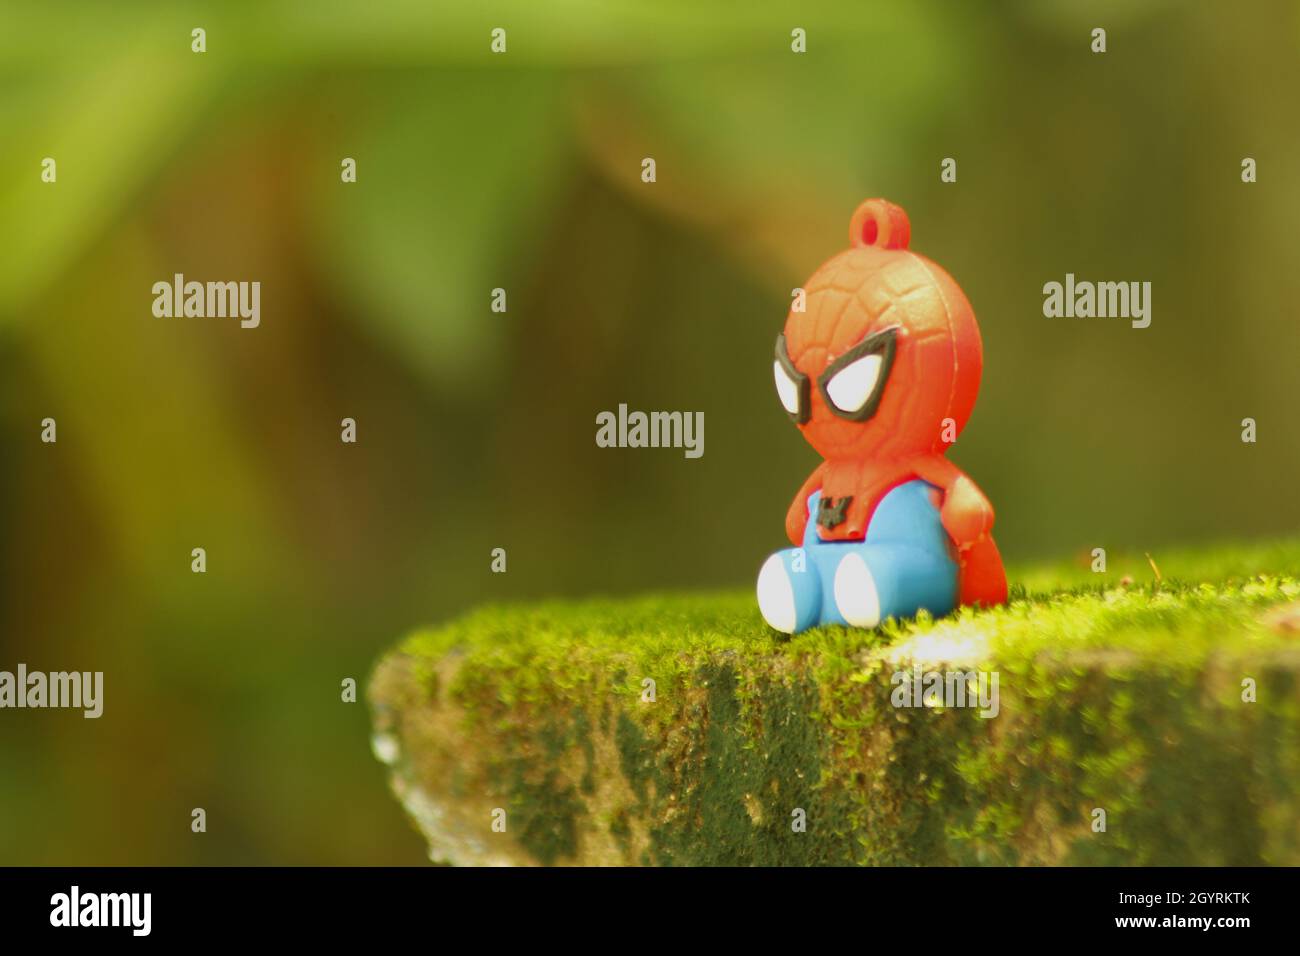 Closeup view of toy spiderman sitting on the moss Stock Photo